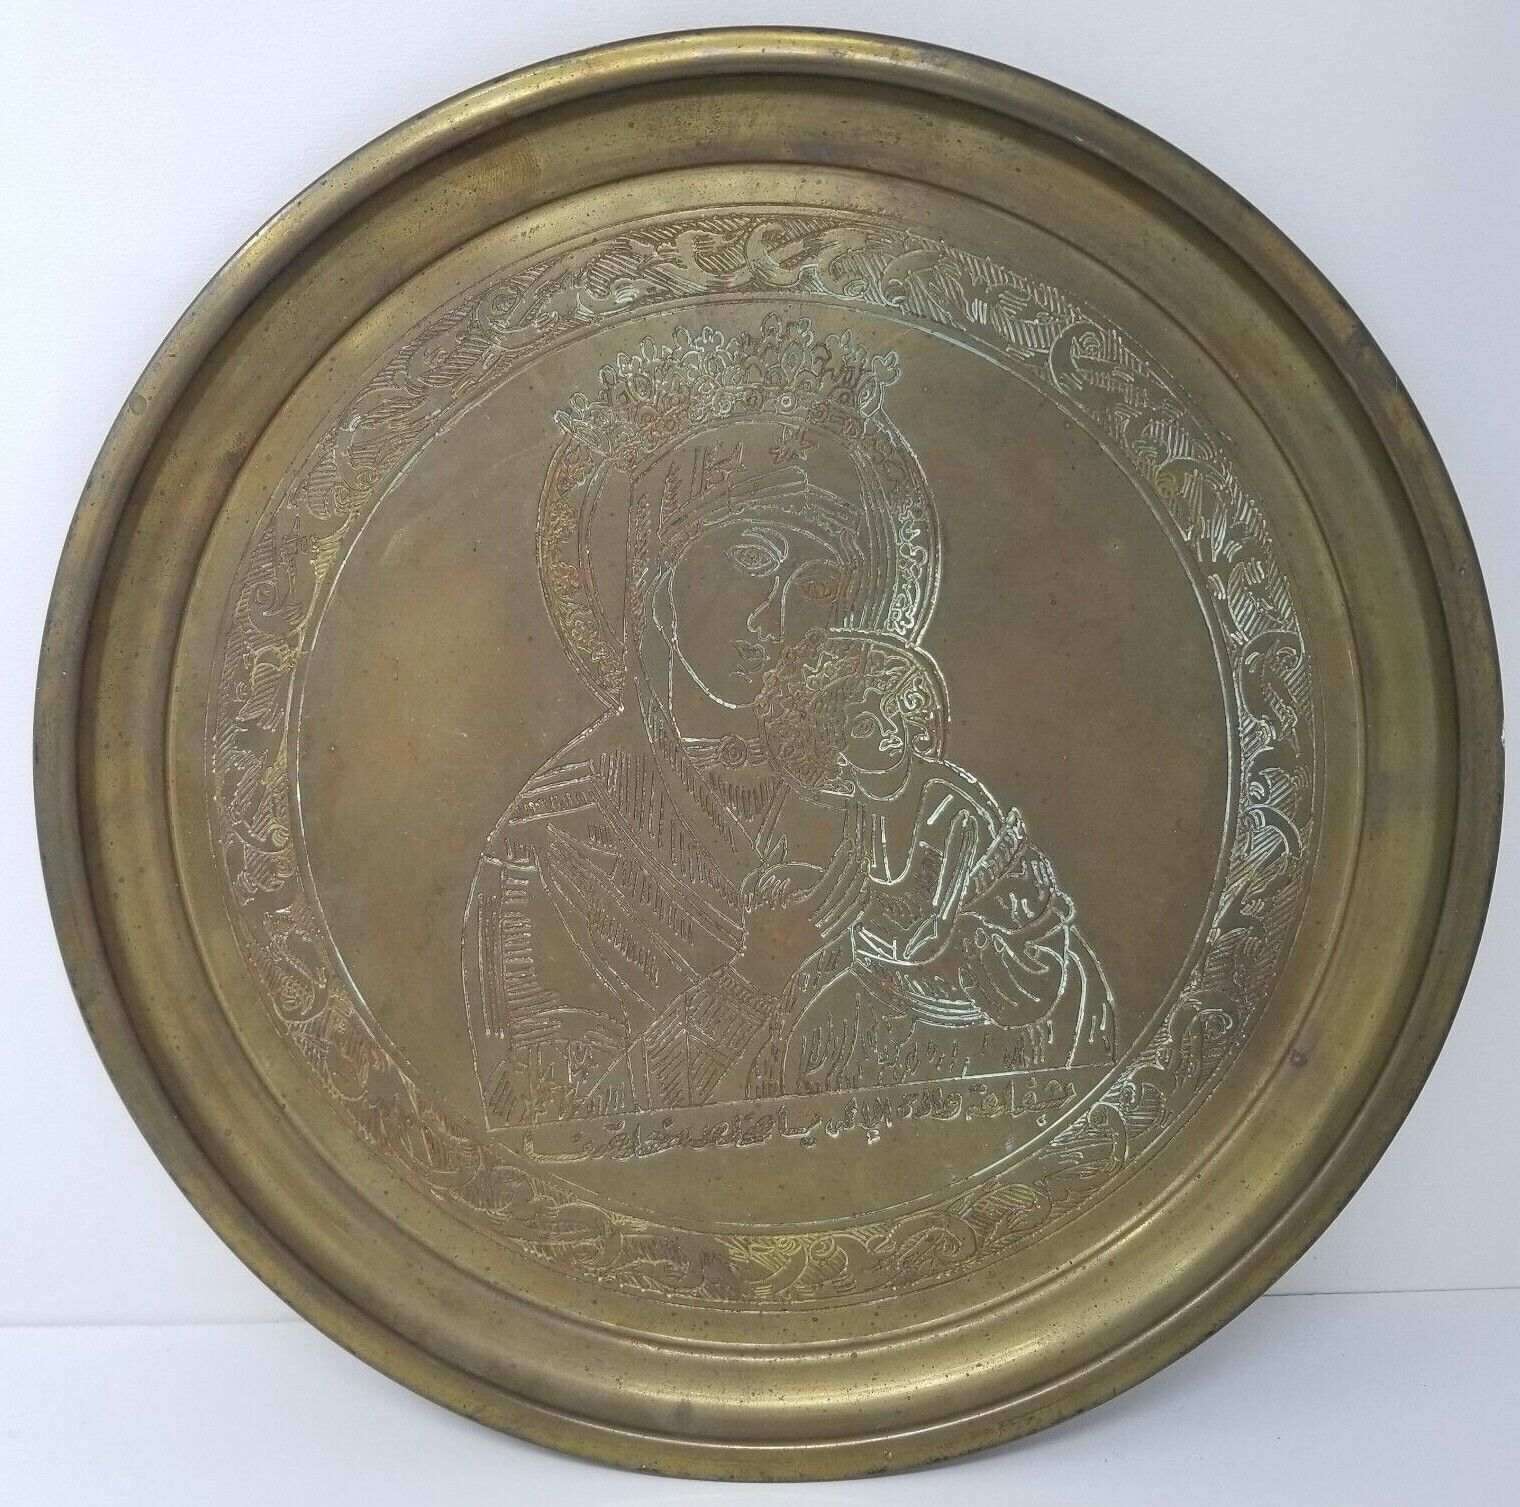 Madonna and Child Mary Etched Engraved Brass Tray Italian Handmade Vintage